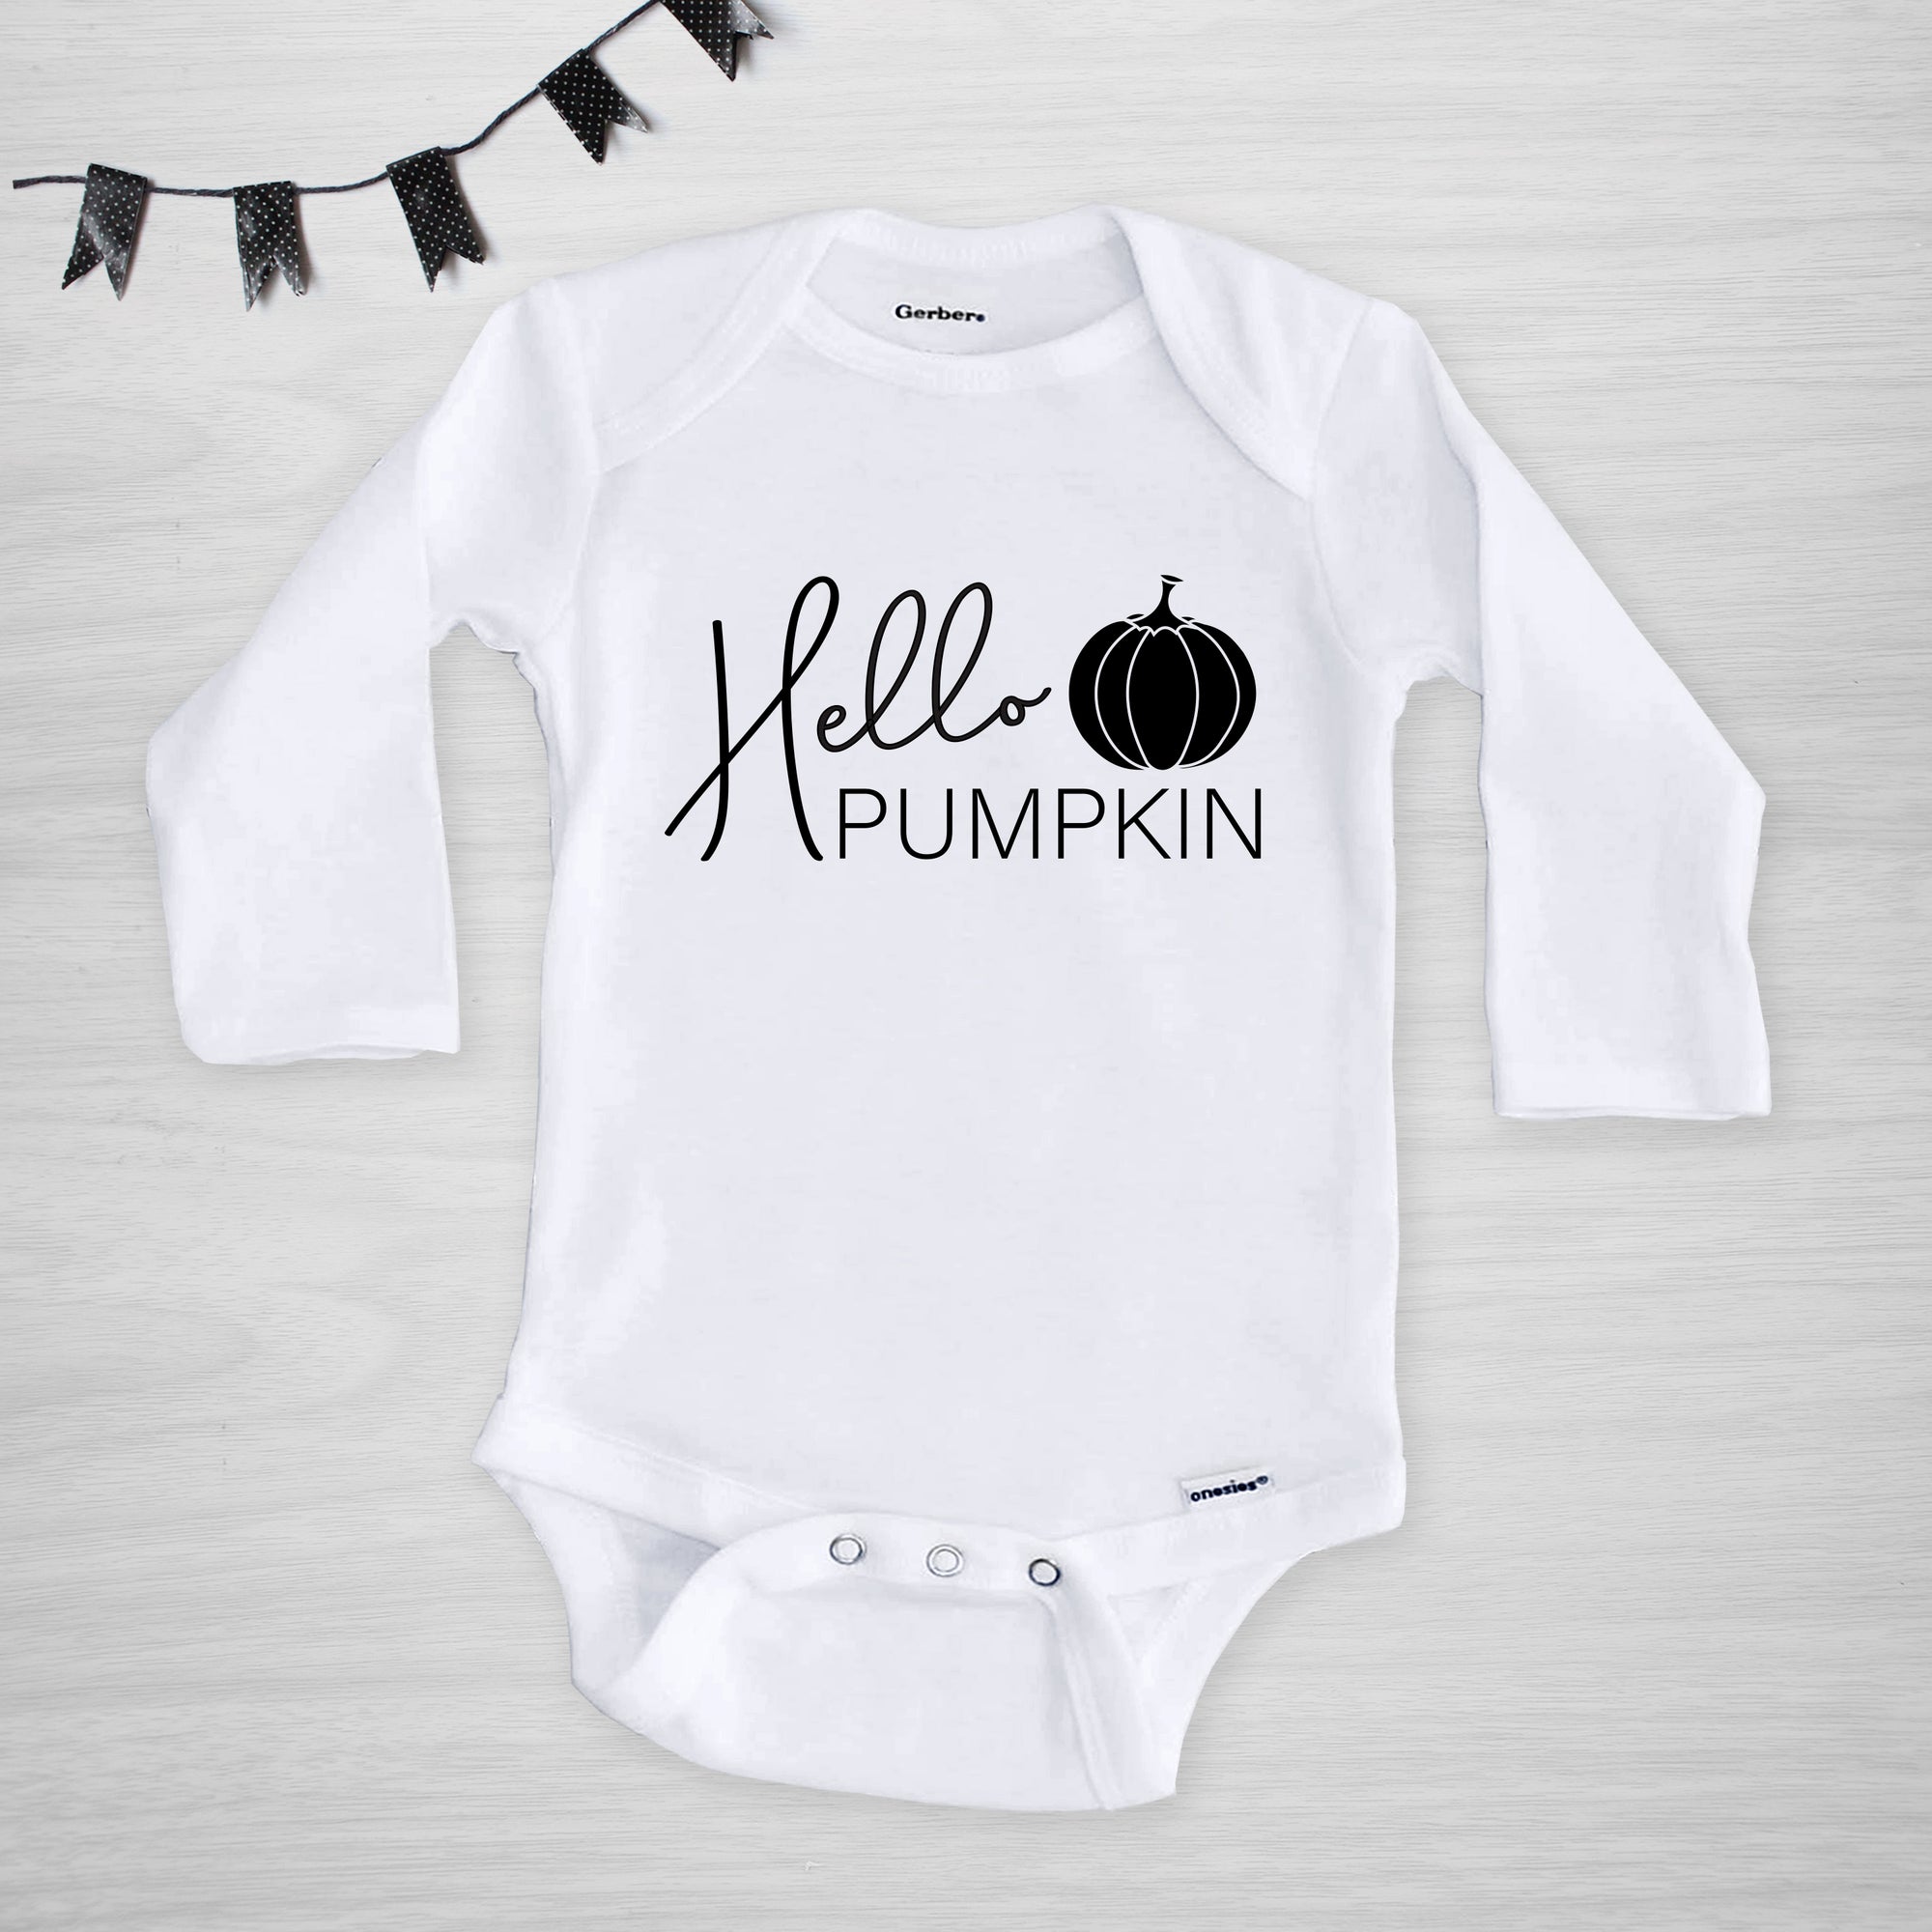 Hello Pumpkin Black and White Gerber Onesie® from Pipsy.com